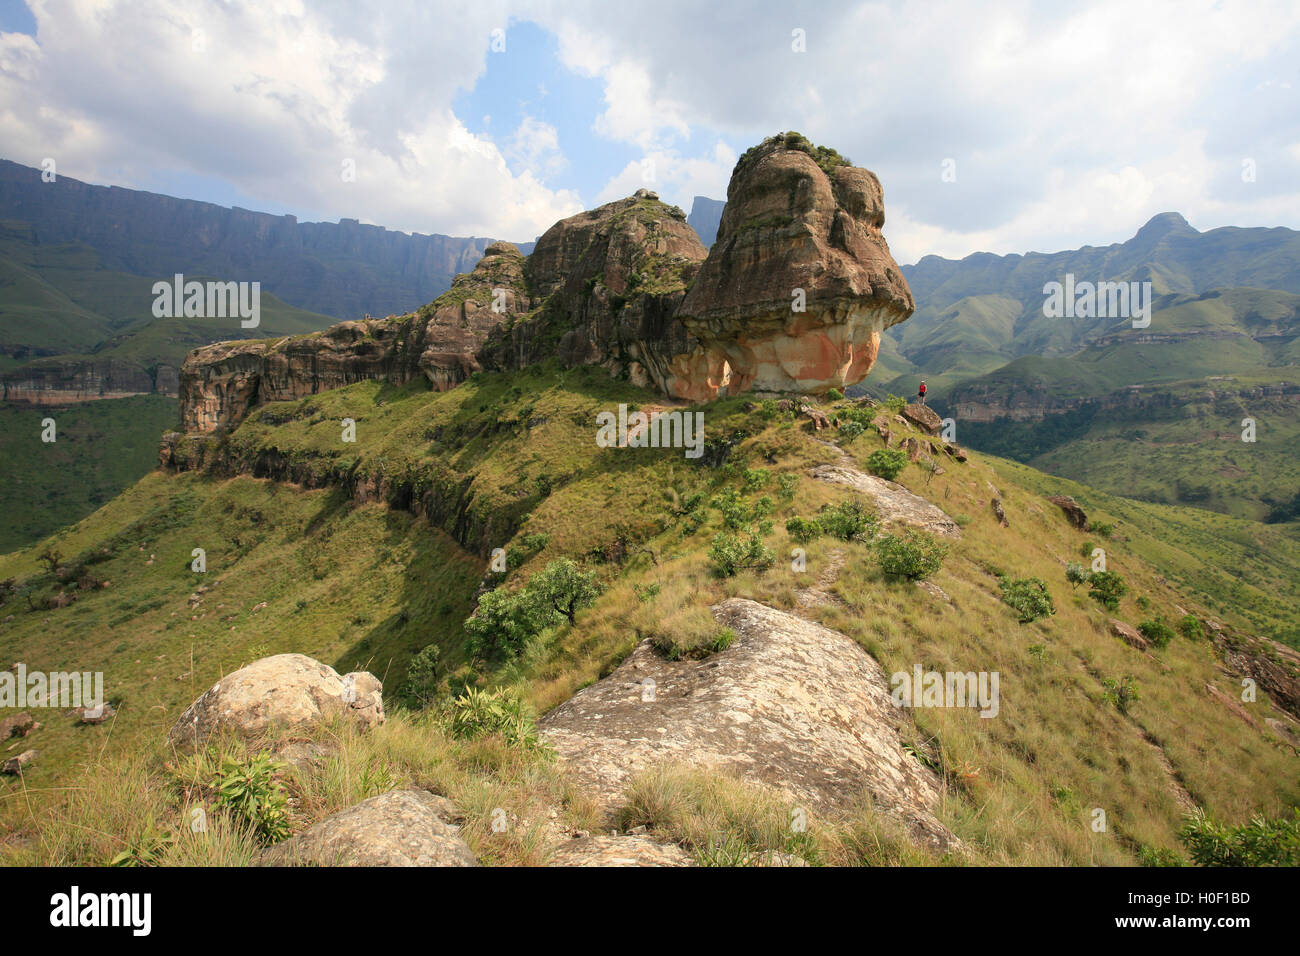 A rock formation in the Drakensberg called the Policemans helmet located near Bergville Stock Photo